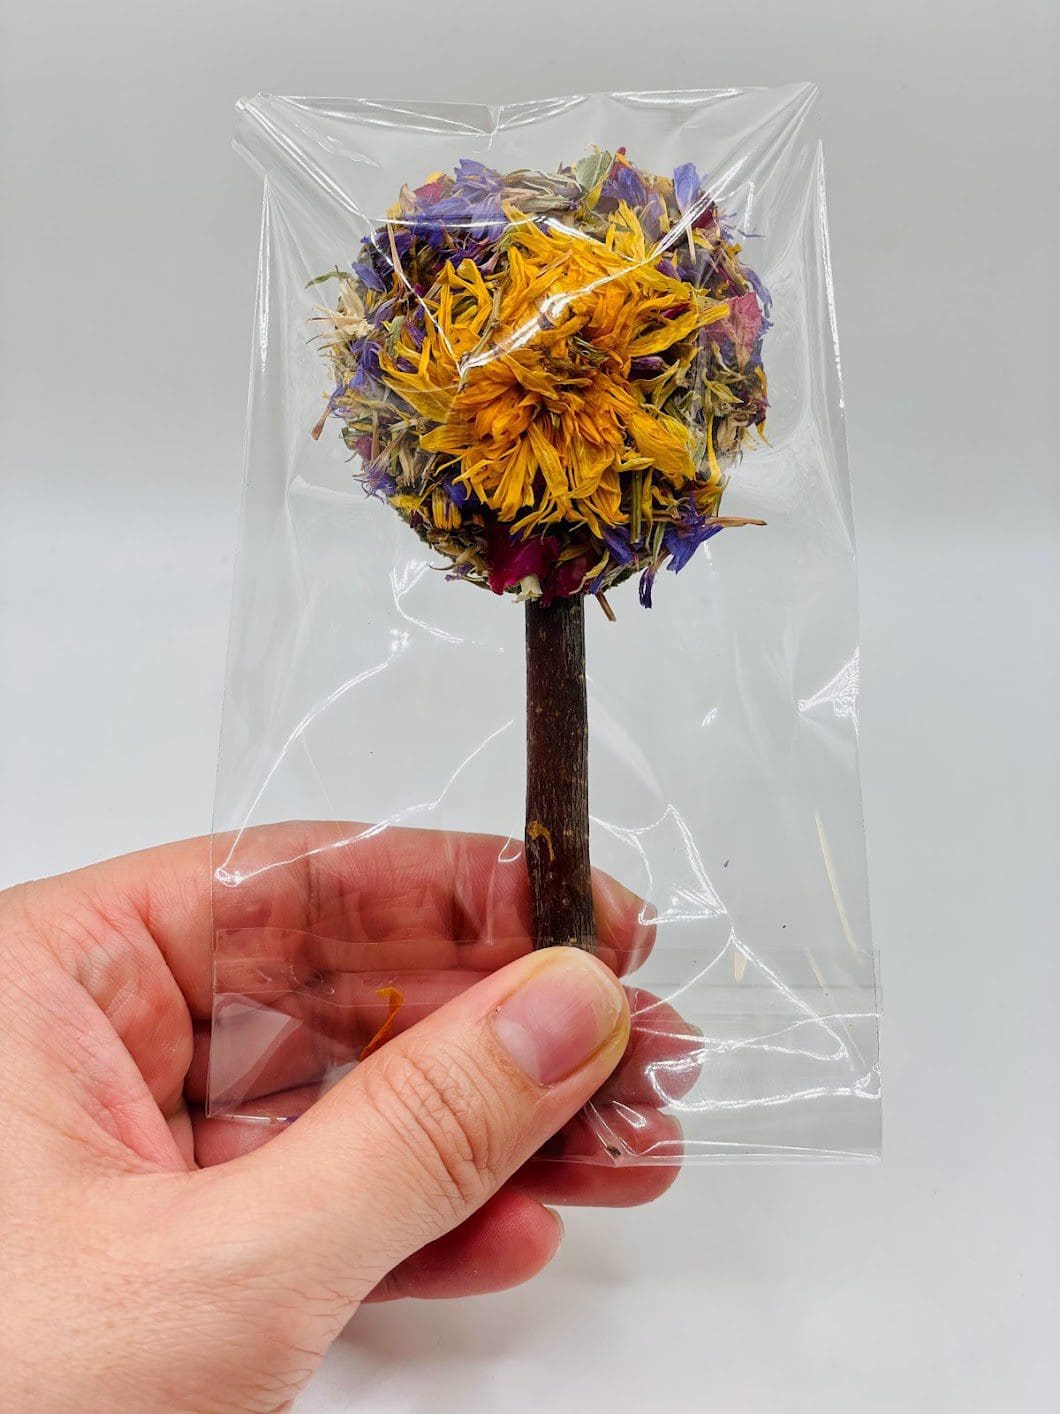 Heart-Shaped Hay Grass Lollipop With Petals Forage Treat for Rabbit, Hamsters, Guinea Pigs, Chinchillas & Small Animals